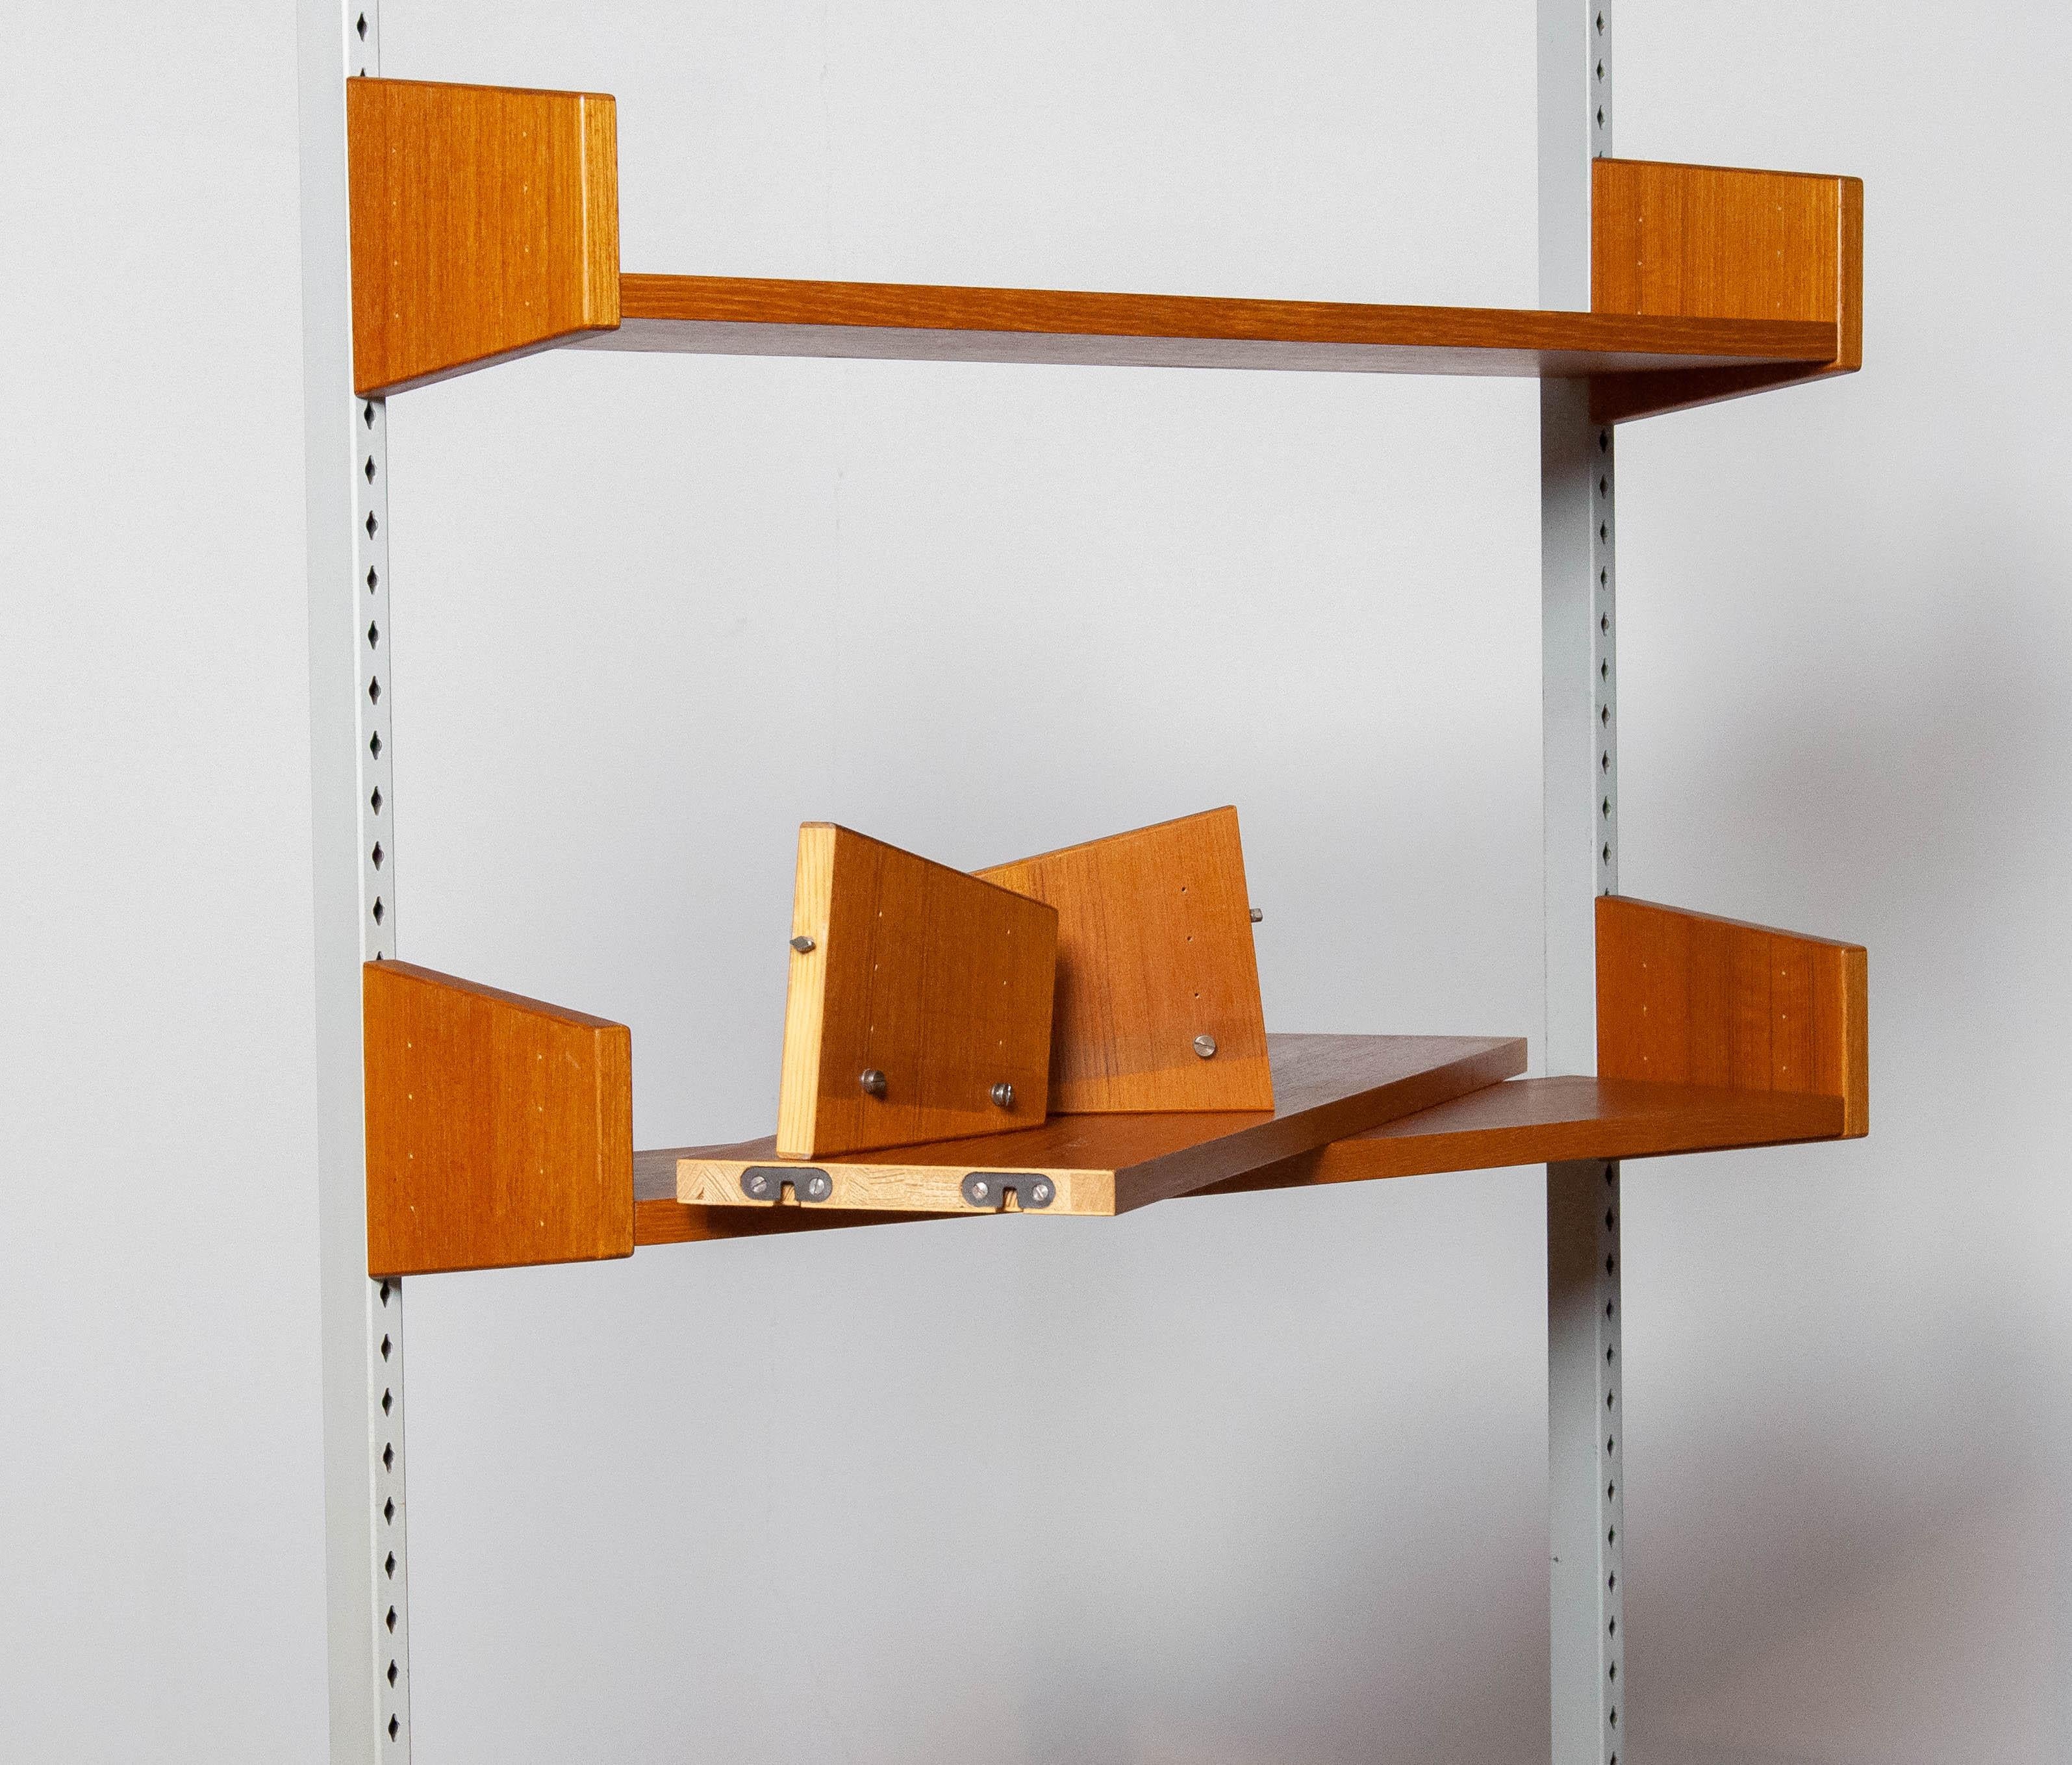 1950's Teak Shelf System / Bookcase in Teak with Steel Bars by Harald Lundqvist For Sale 3